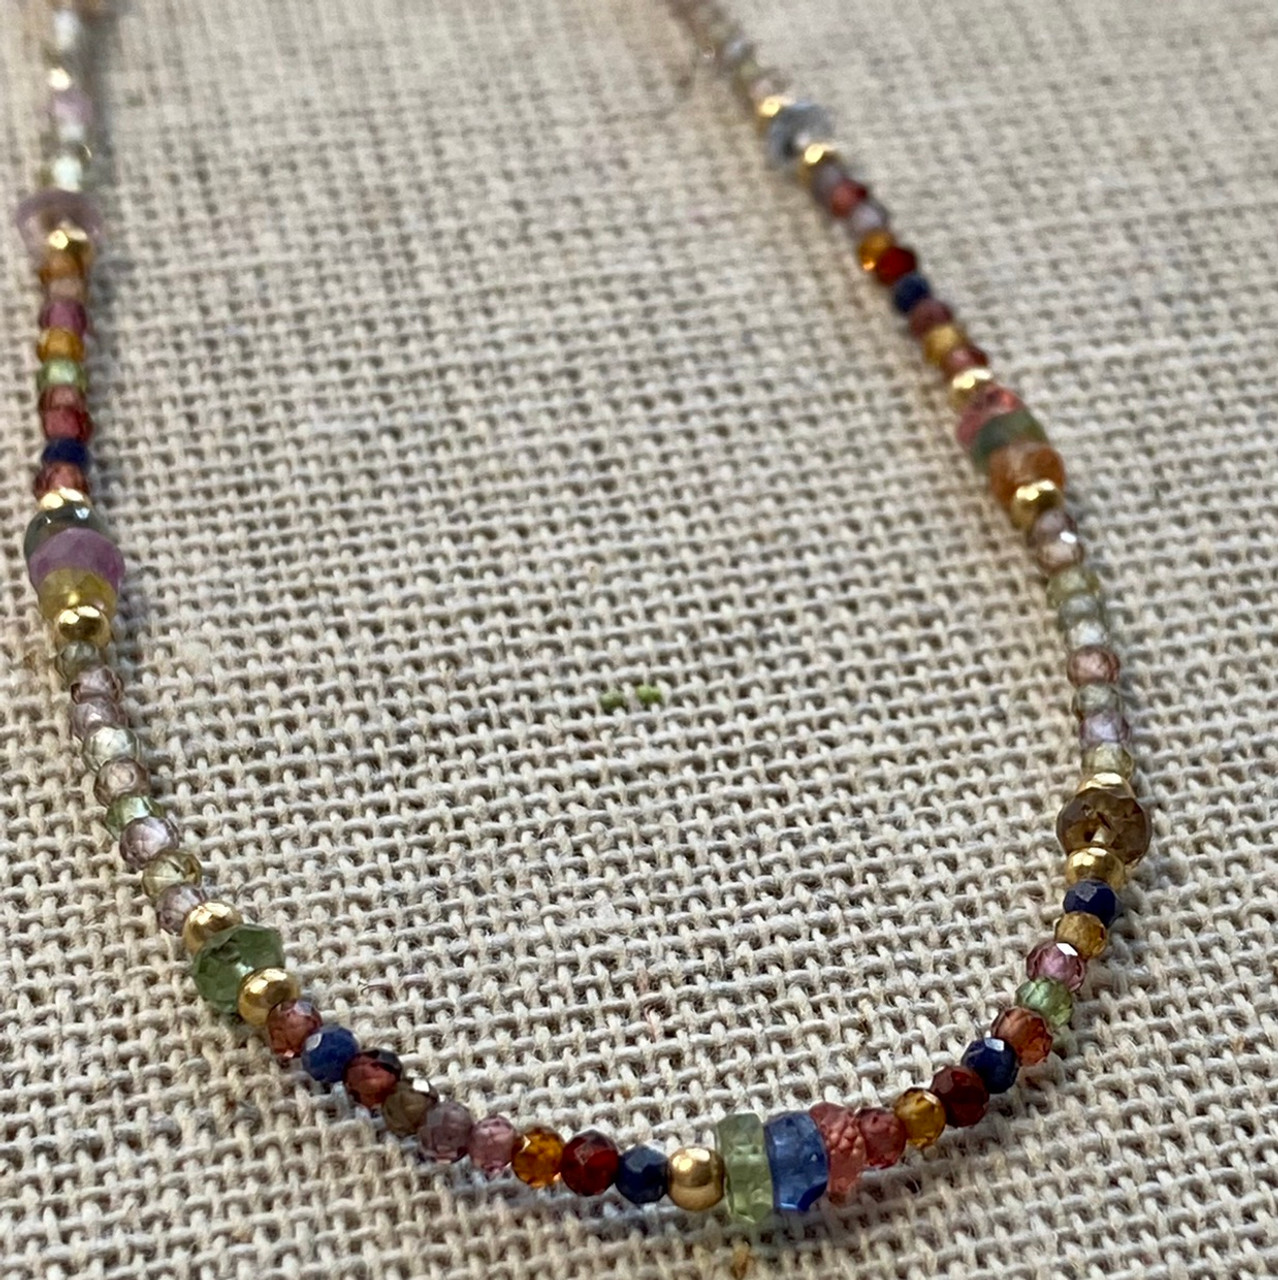 Multicolored Sapphire Beaded Necklace - Iris Perry Designs